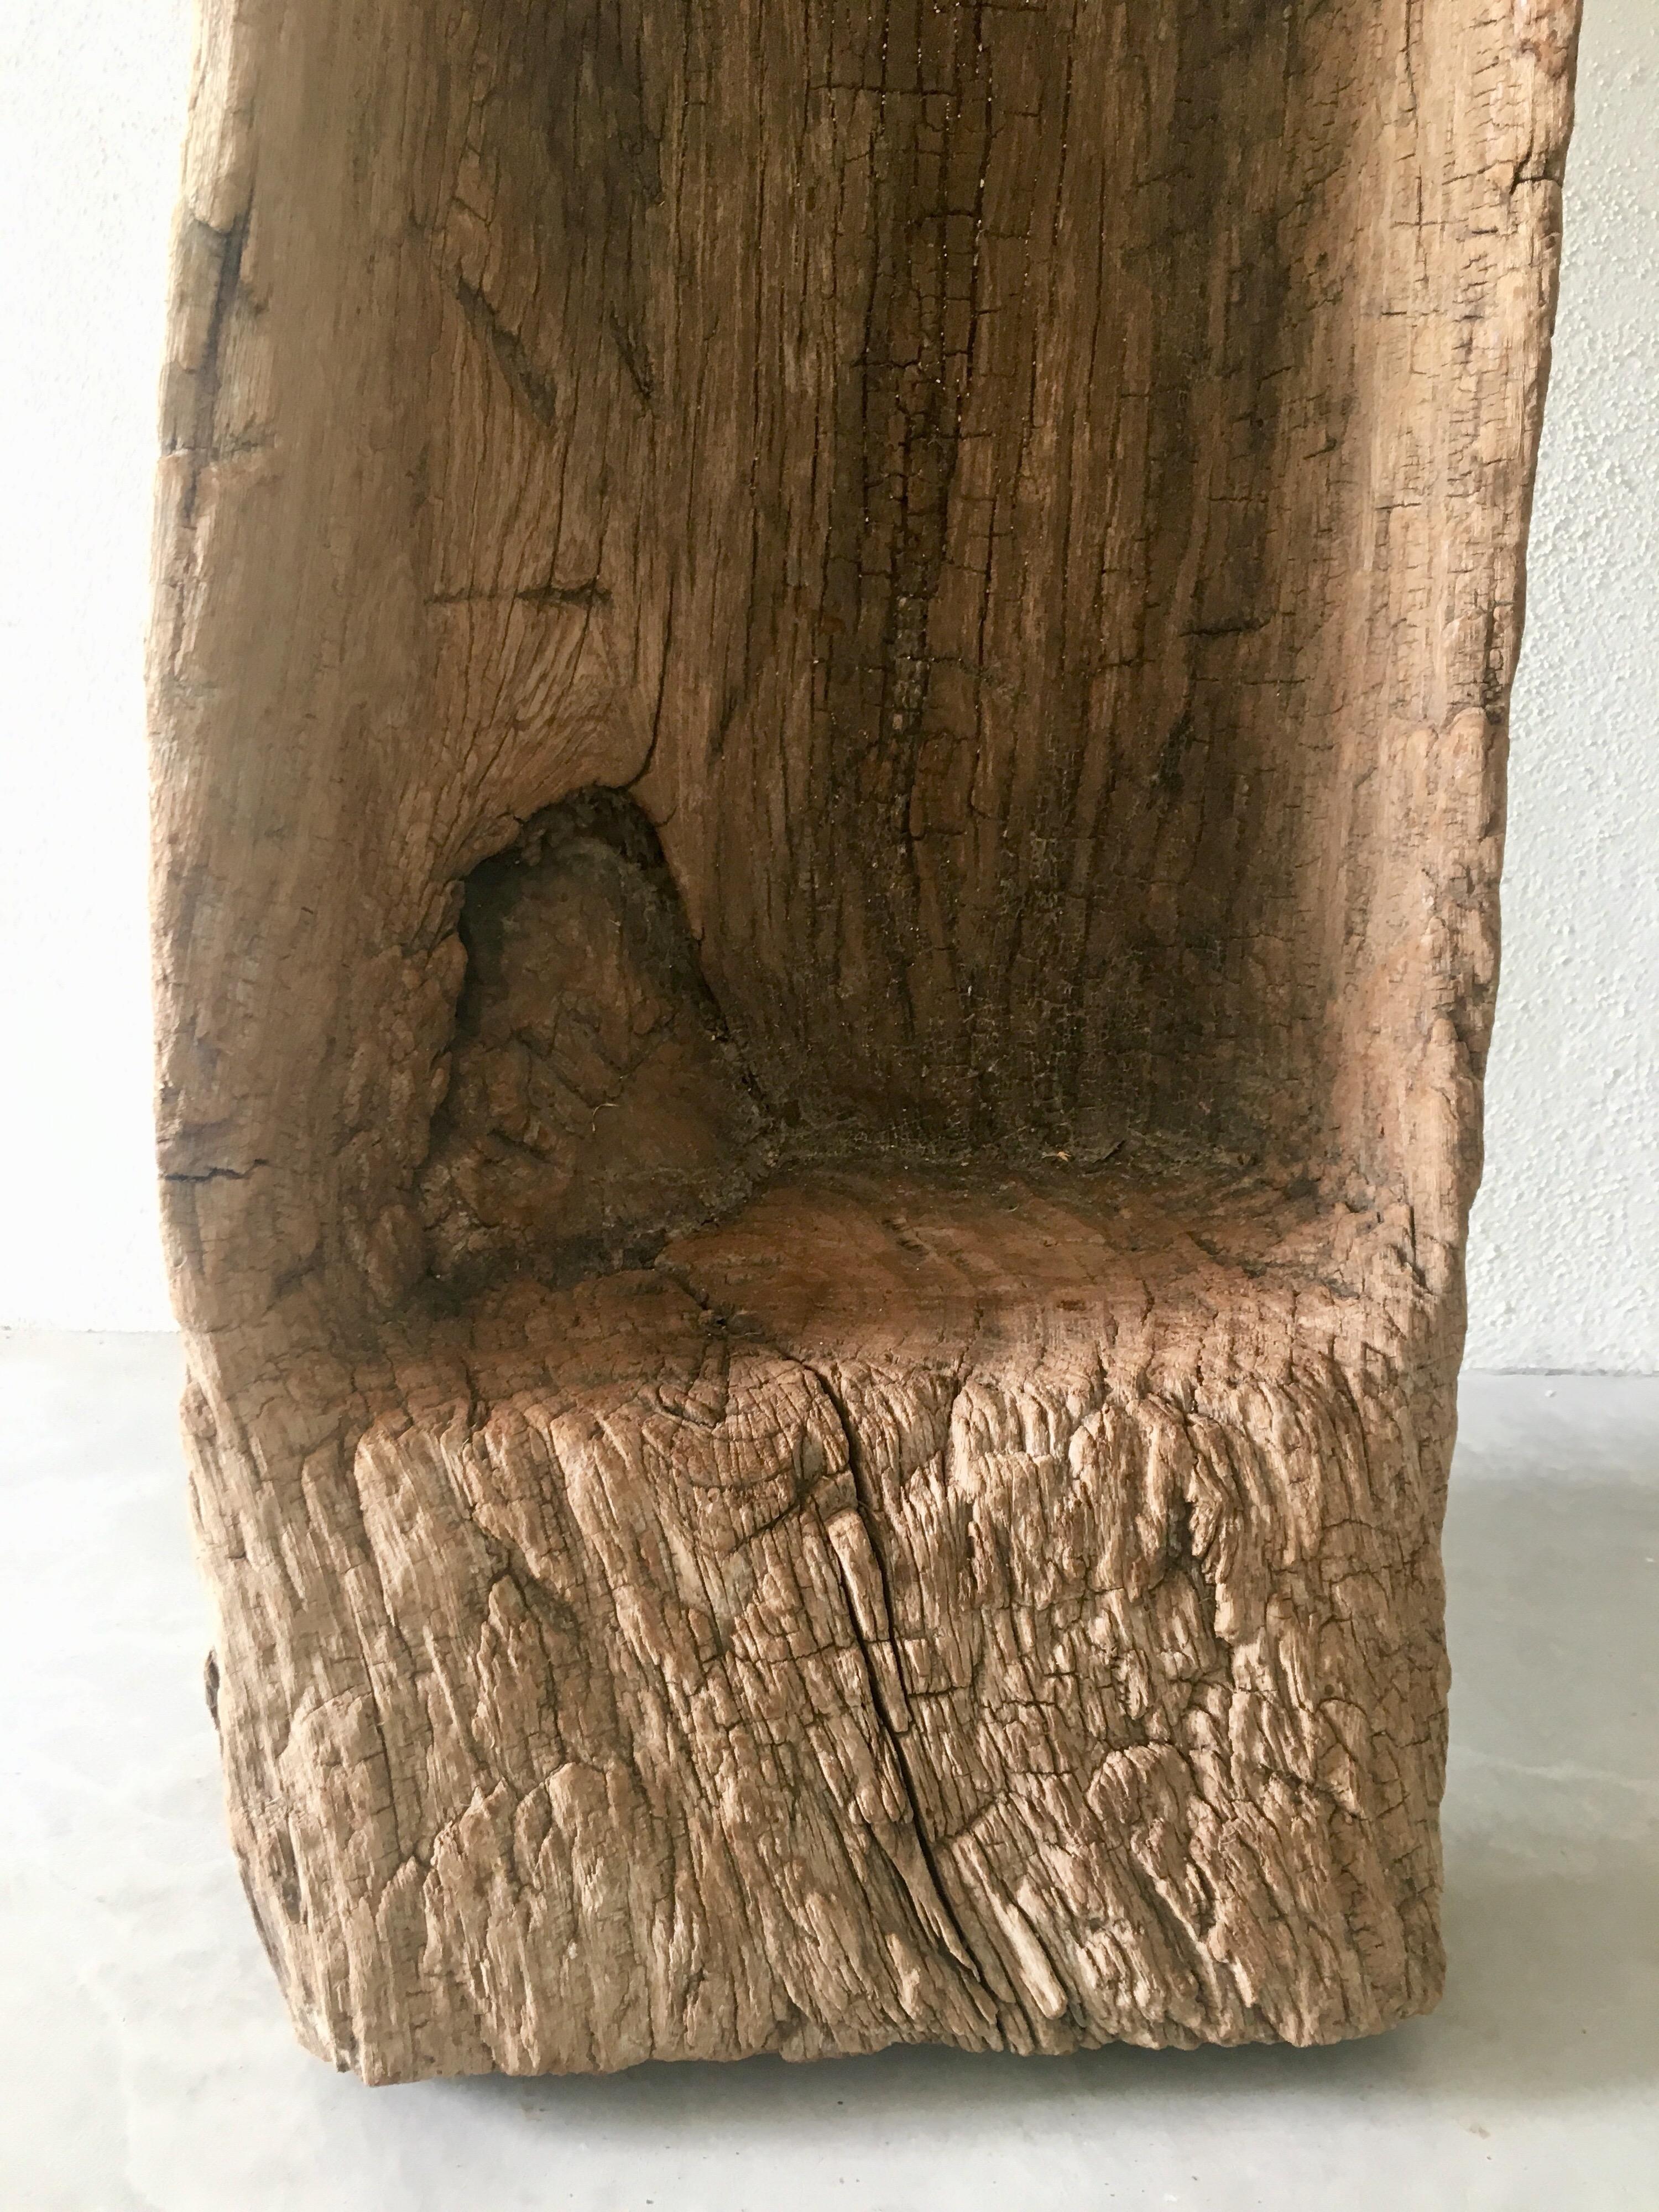 Antique mesquite trough from Guanajuato, Mexico. Found in the Sierra Gorda region. Hand-carved using an axe and chisel.